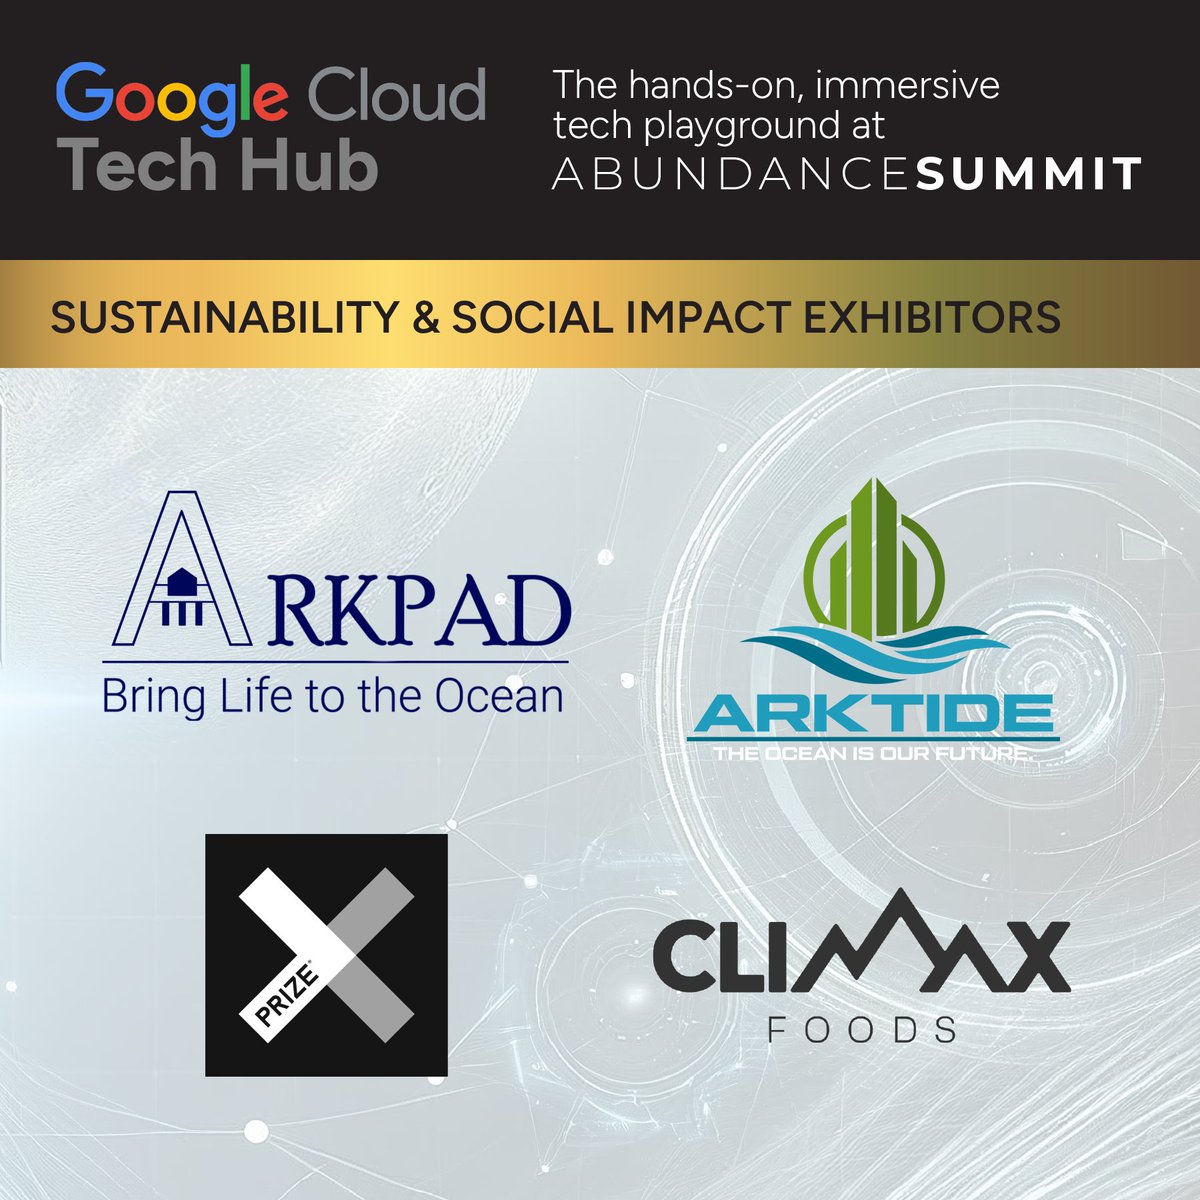 We're pleased to have impactful organizations like @xprize, @ClimaxFoods, @Arktide1, and @real_Arkpad with us at #AbundanceSummit2024, highlighting their missions to solve some of the world's grand challenges in health, sustainability, innovative housing, and so much more!